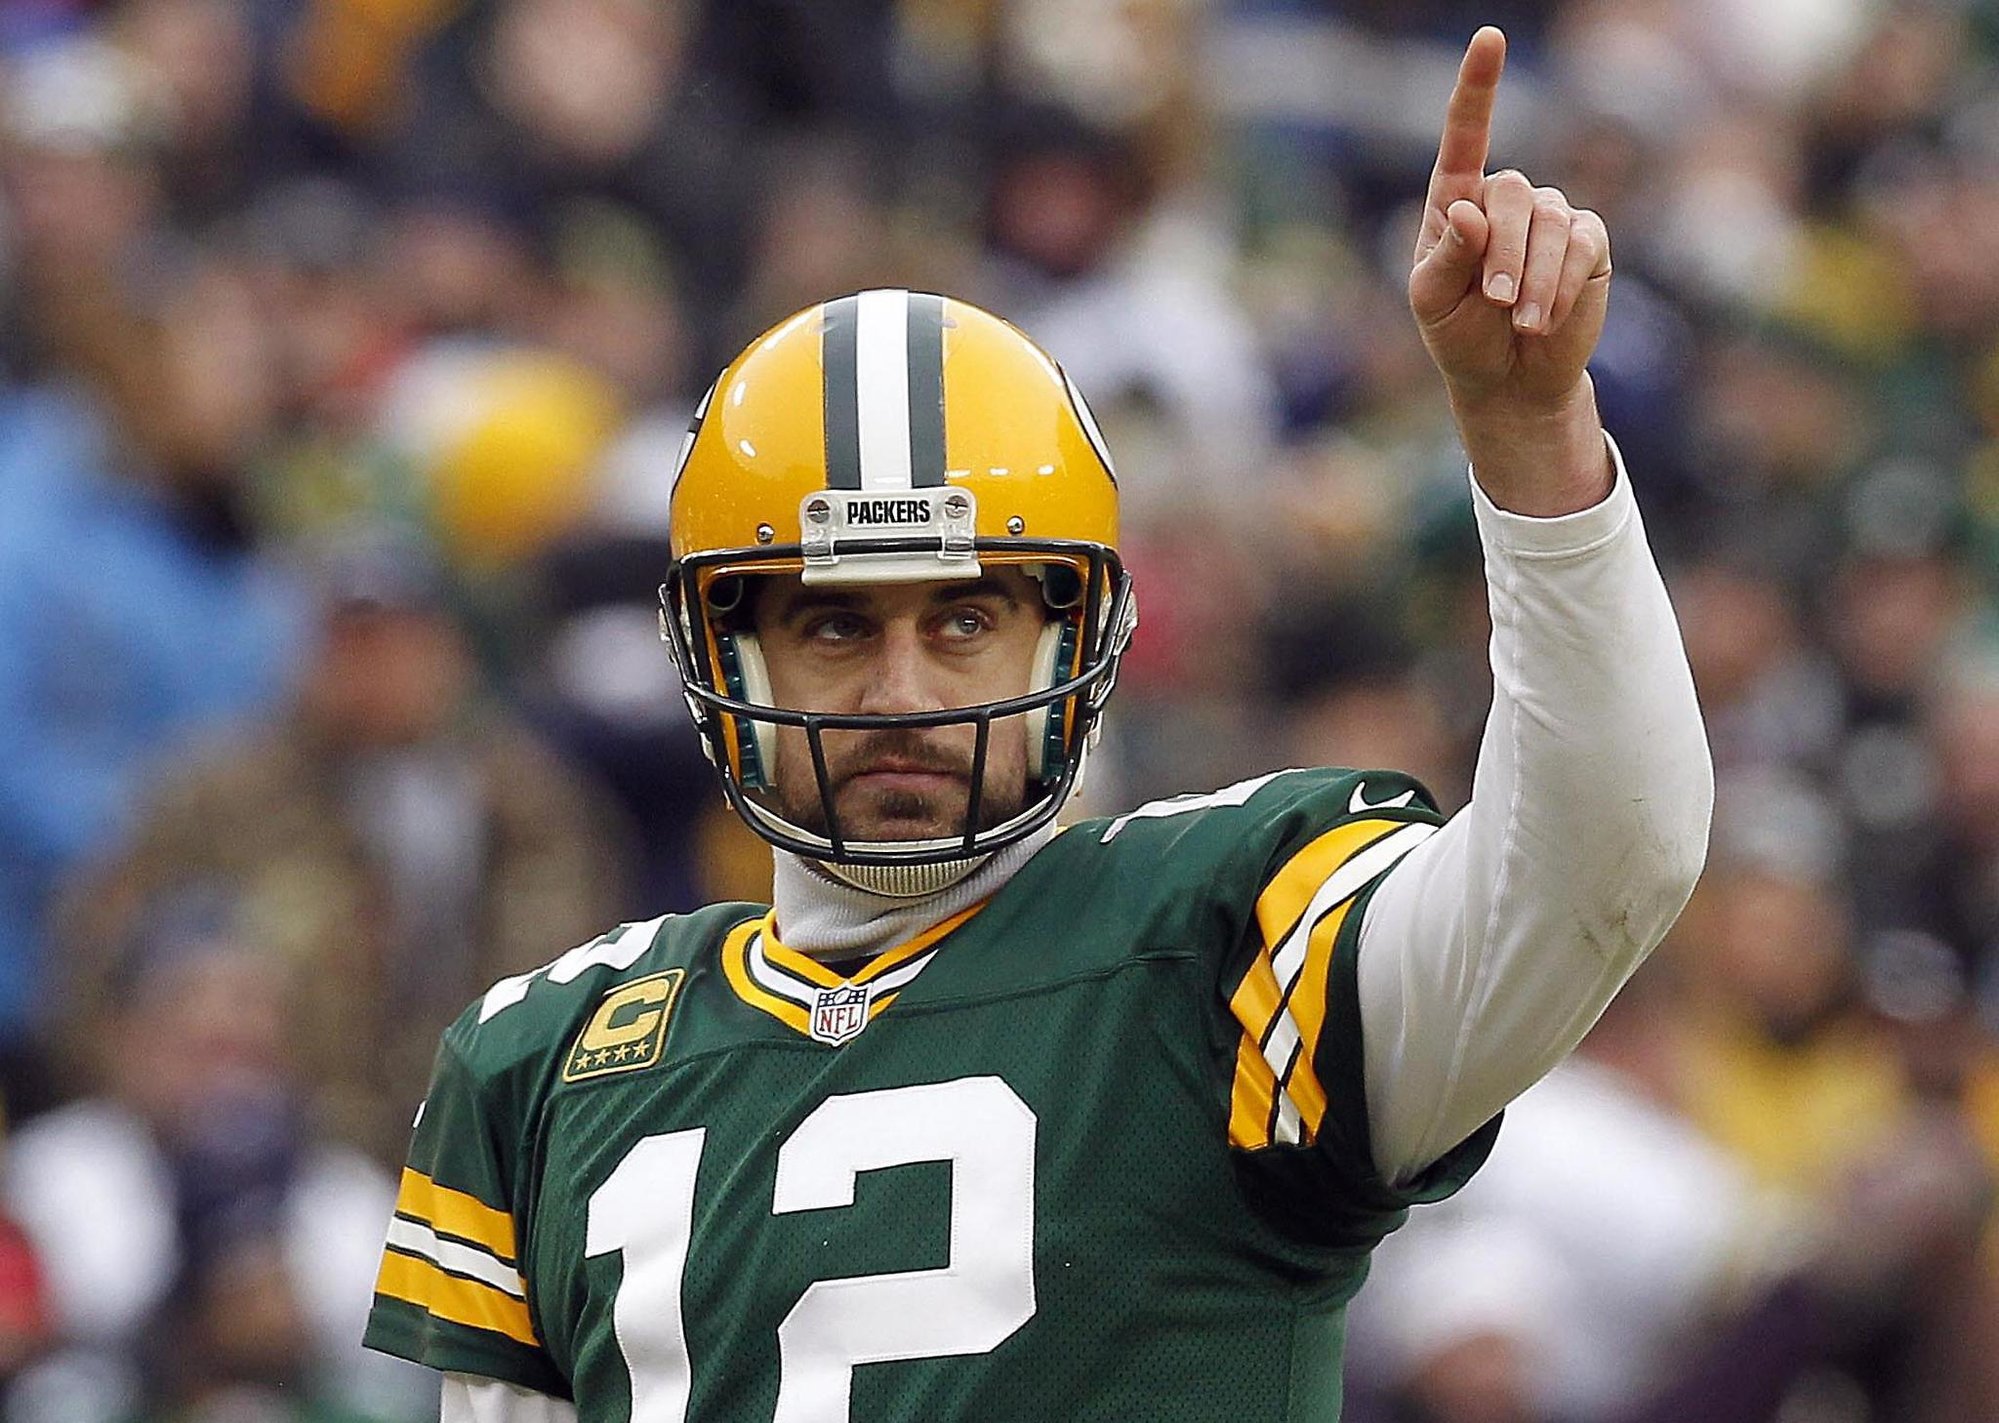 Aaron Rodgers Backgrounds, Compatible - PC, Mobile, Gadgets| 1999x1423 px